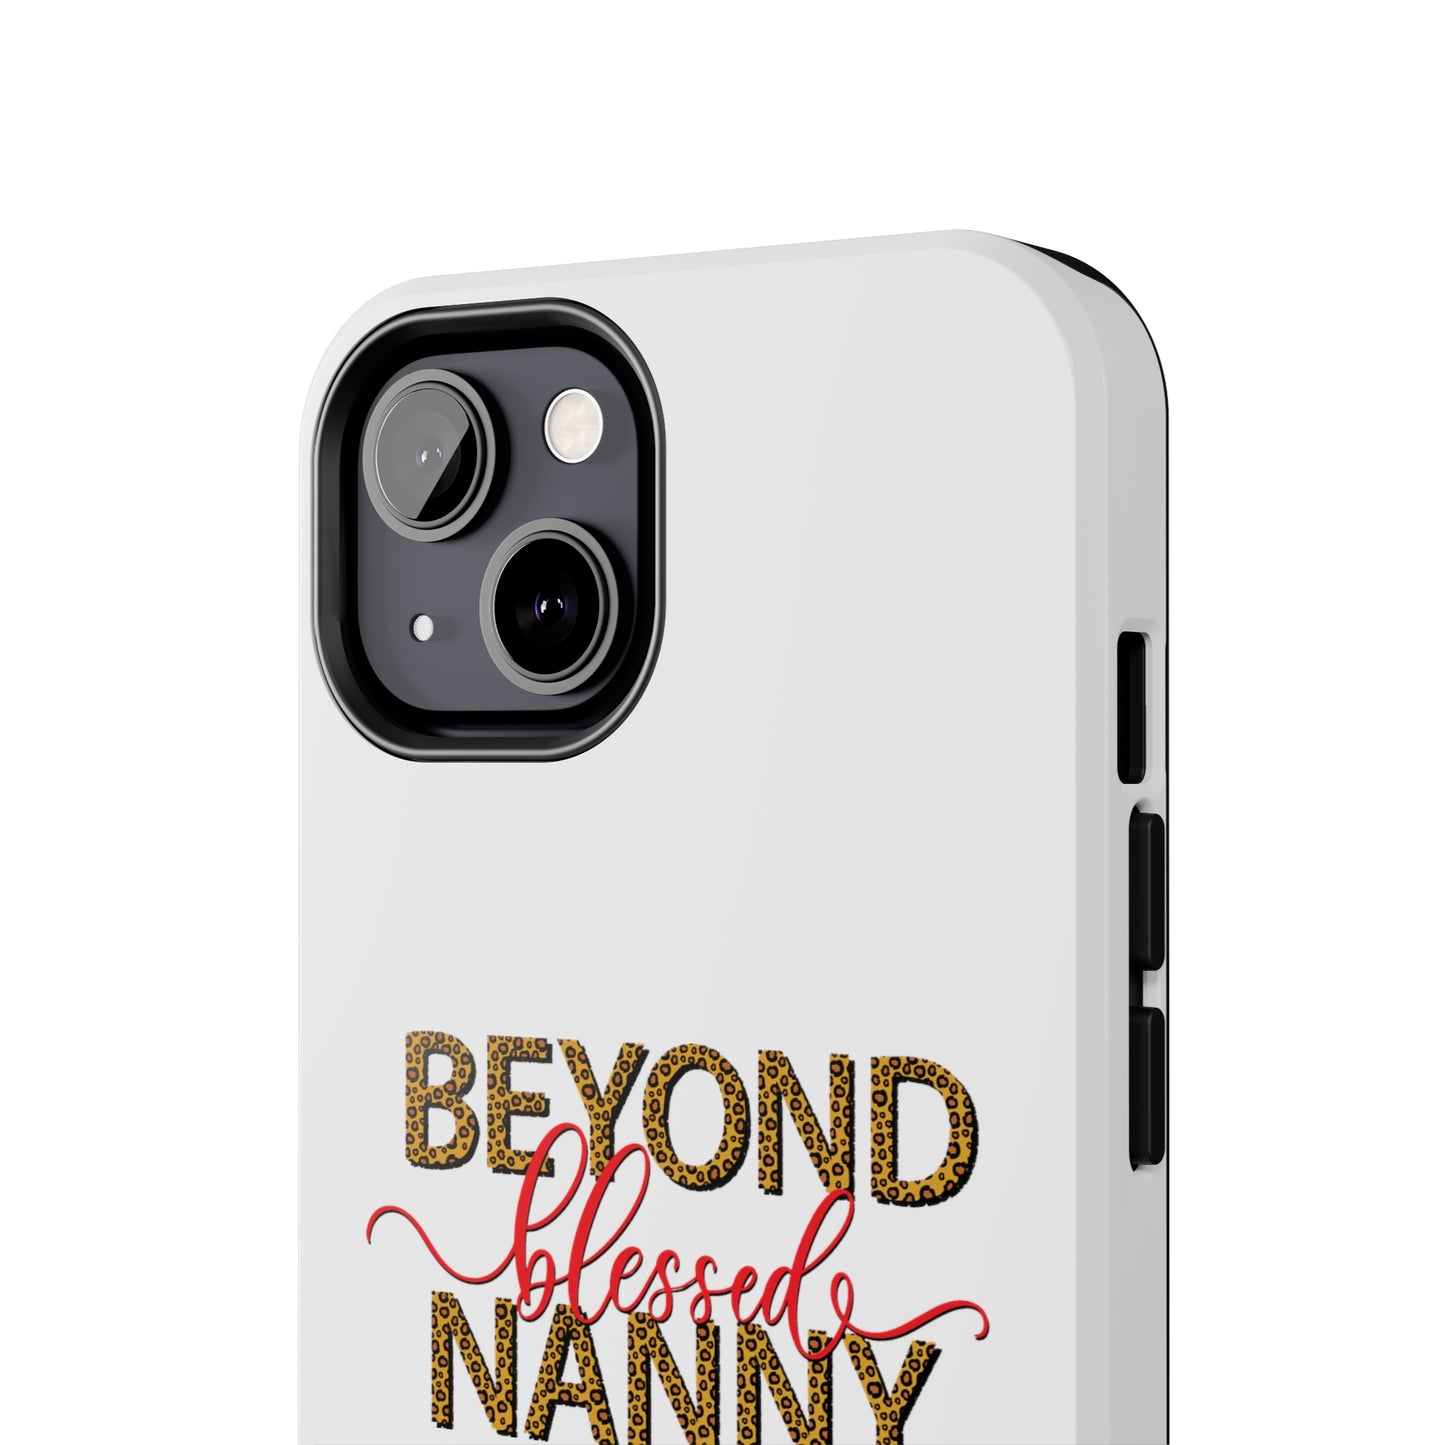 Beyond Blessed Nanny - Red - Tough iPhone Cases